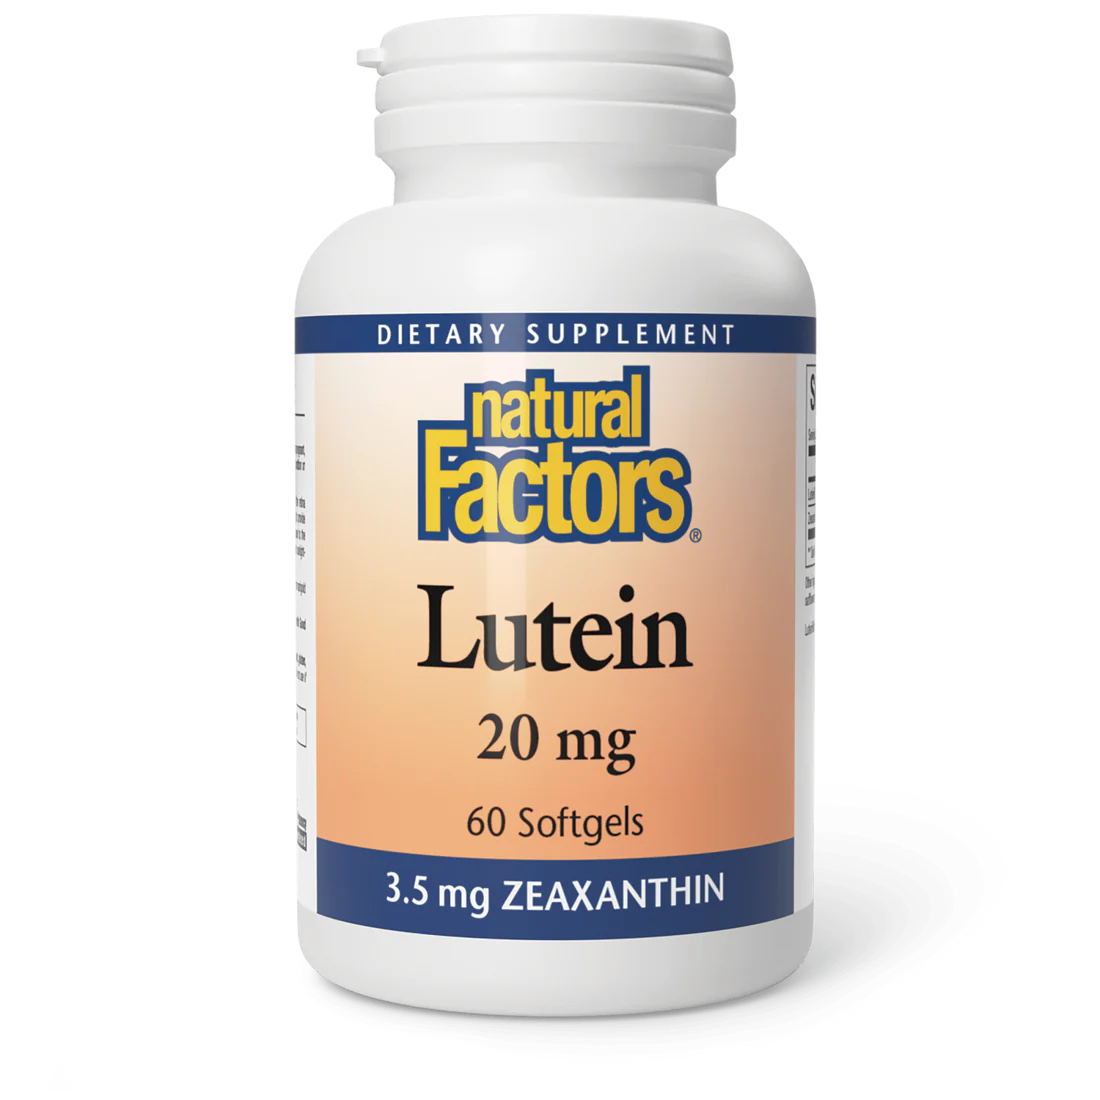 Lutein 20 mg  by Natural Factors, 60 Softfgels